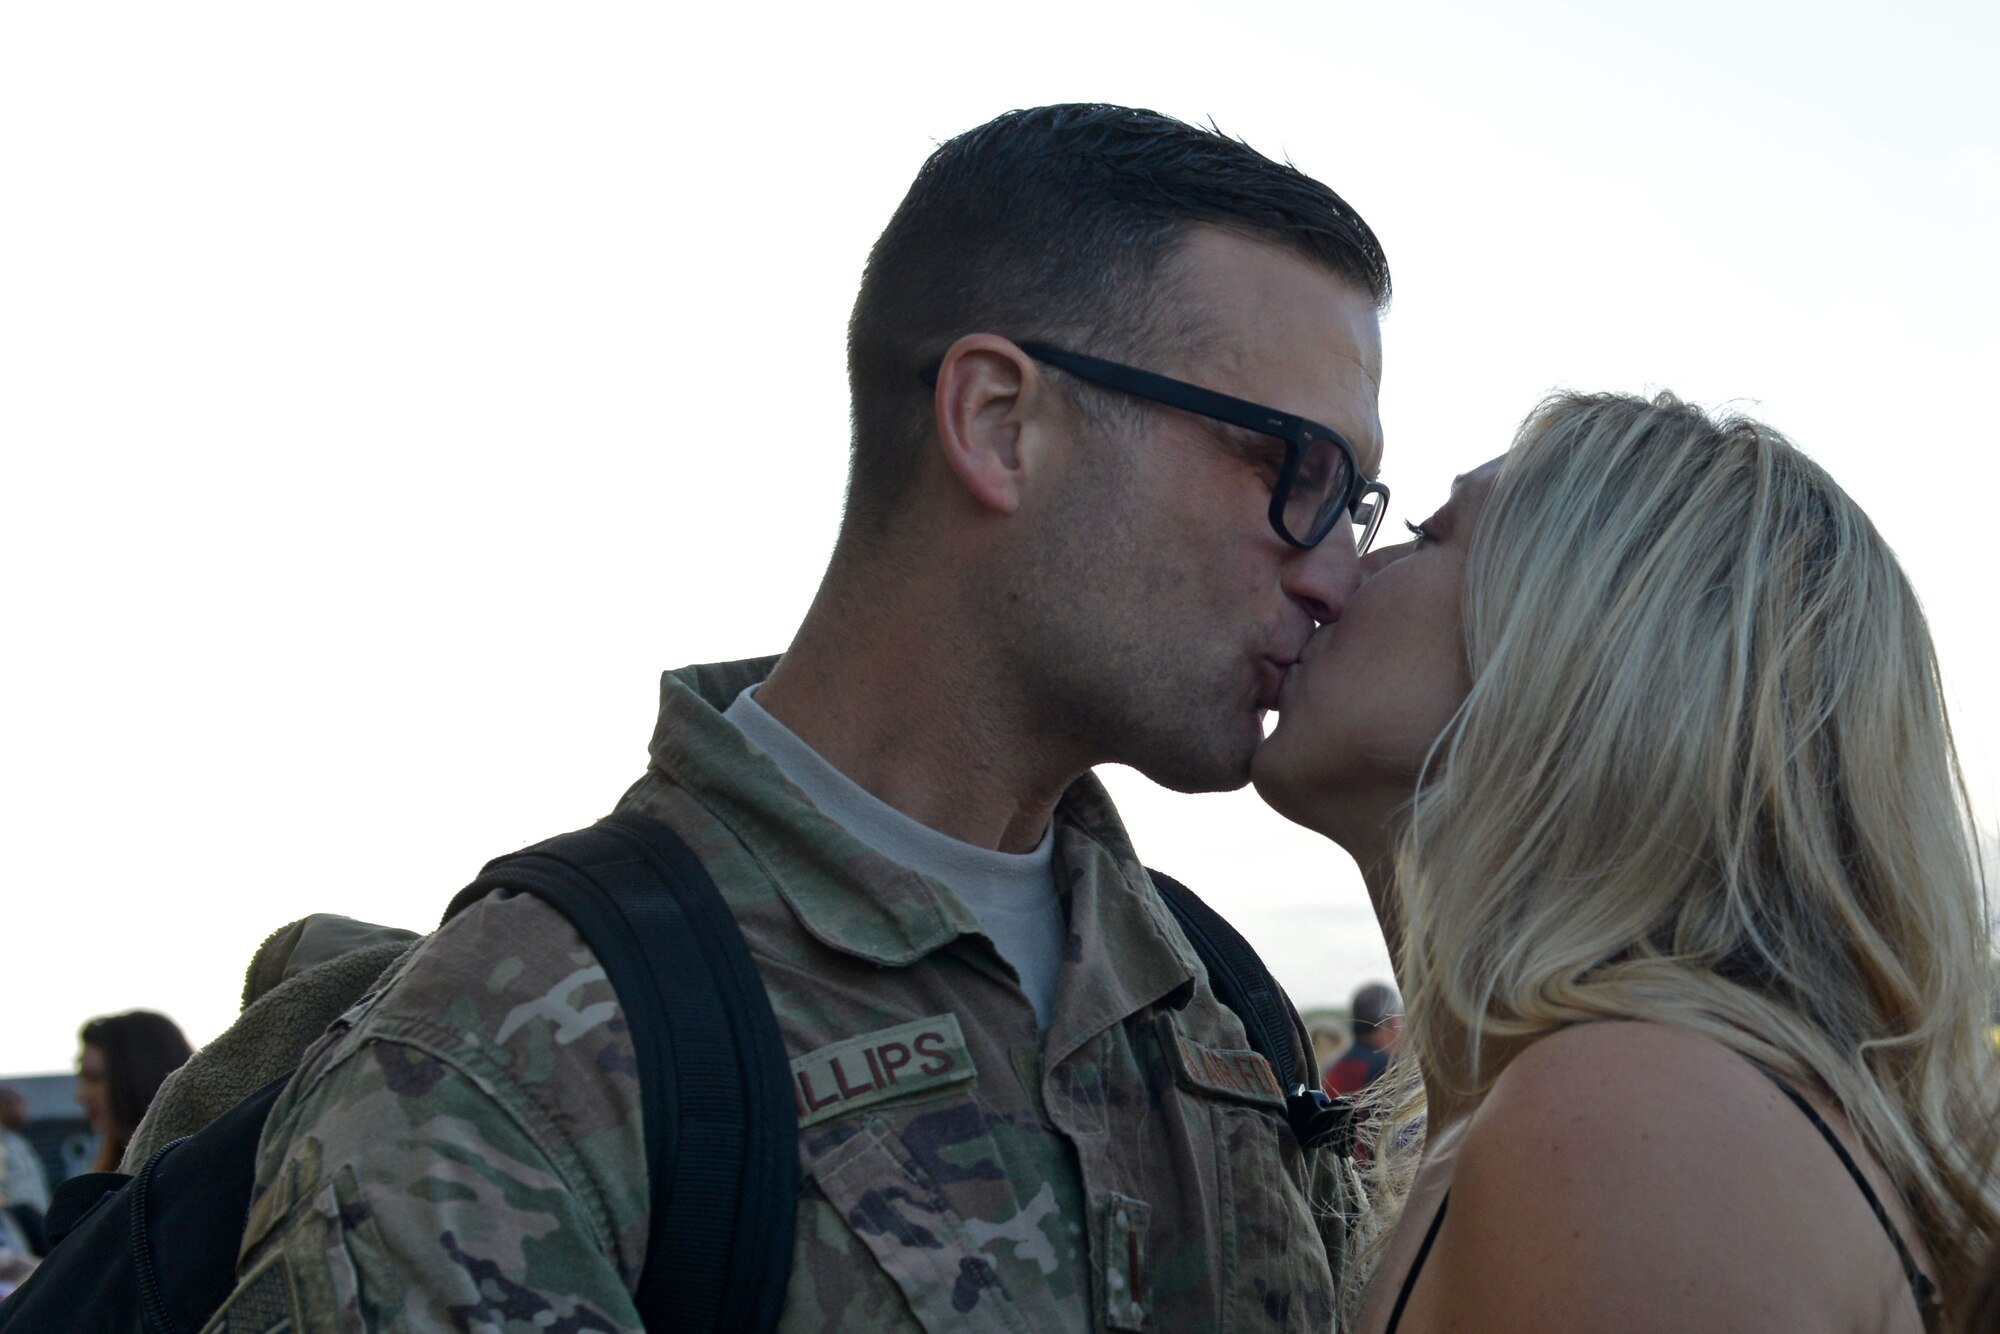 A U.S. Airman assigned to the 20th Fighter Wing kisses his significant other after returning to Shaw Air Force Base, S.C., May 5, 2017. Airmen returned after a six-month deployment to the United States Central Command area of responsibility. (U.S. Air Force photo by Airman 1st Class Destinee Sweeney)